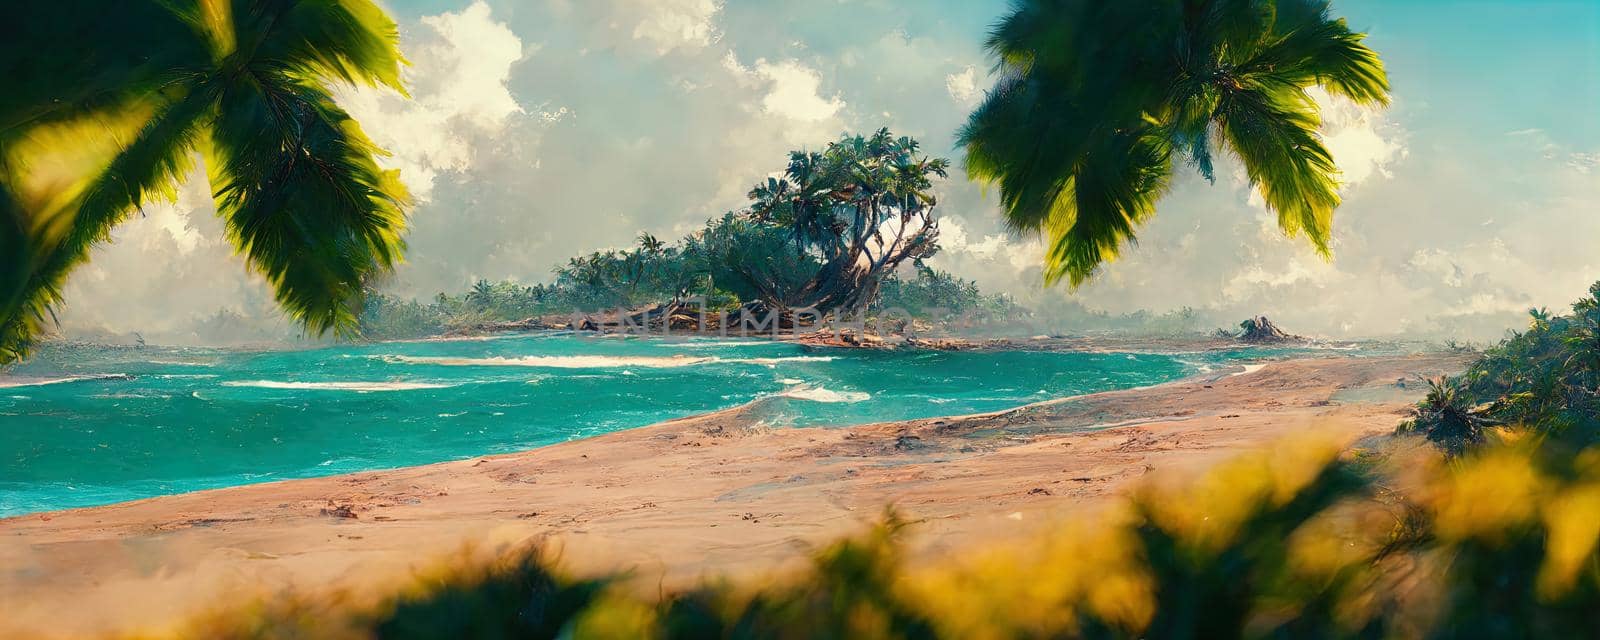 illustrative image of a wild beach with palm trees, an azure sea and a sandy spit by TRMK